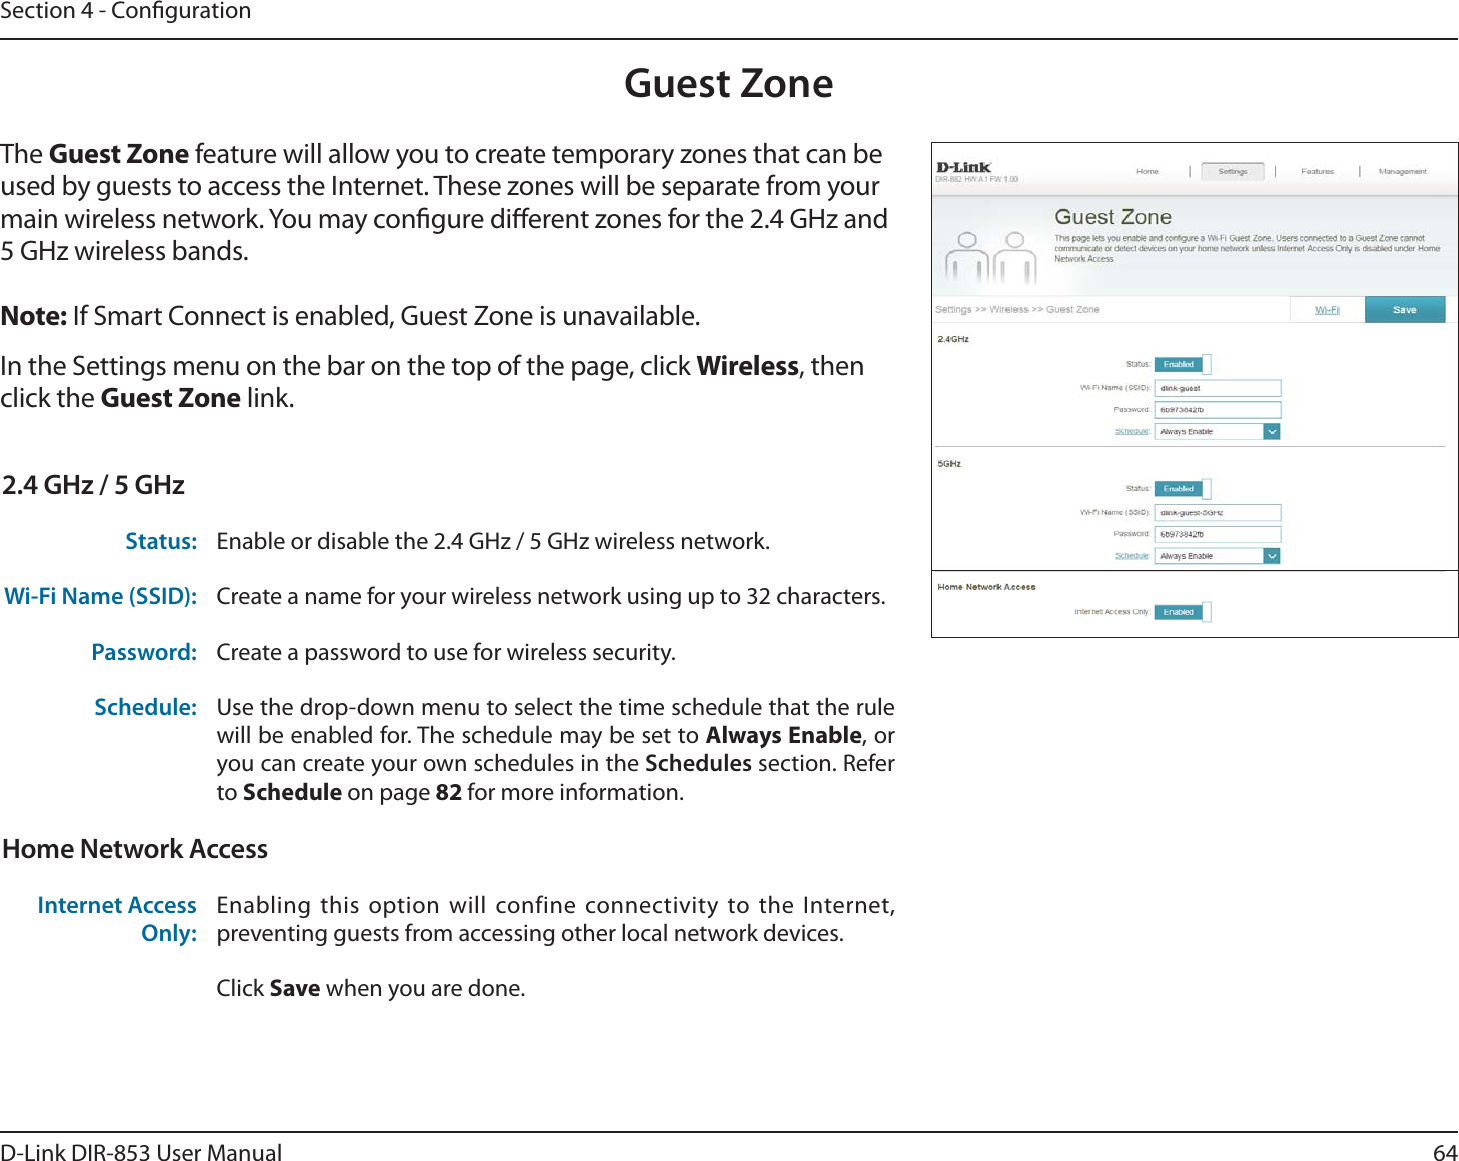 64D-Link DIR-853 User ManualSection 4 - CongurationGuest ZoneIn the Settings menu on the bar on the top of the page, click Wireless, then click the Guest Zone link. The Guest Zone feature will allow you to create temporary zones that can be used by guests to access the Internet. These zones will be separate from your main wireless network. You may congure dierent zones for the 2.4 GHz and 5 GHz wireless bands.Note: If Smart Connect is enabled, Guest Zone is unavailable.2.4 GHz / 5 GHzStatus: Enable or disable the 2.4 GHz / 5 GHz wireless network.Wi-Fi Name (SSID): Create a name for your wireless network using up to 32 characters. Password: Create a password to use for wireless security. Schedule: Use the drop-down menu to select the time schedule that the rule will be enabled for. The schedule may be set to Always Enable, or you can create your own schedules in the Schedules section. Refer to Schedule on page 82 for more information.Home Network AccessInternet Access Only:Enabling this option will confine connectivity to the Internet, preventing guests from accessing other local network devices.Click Save when you are done.